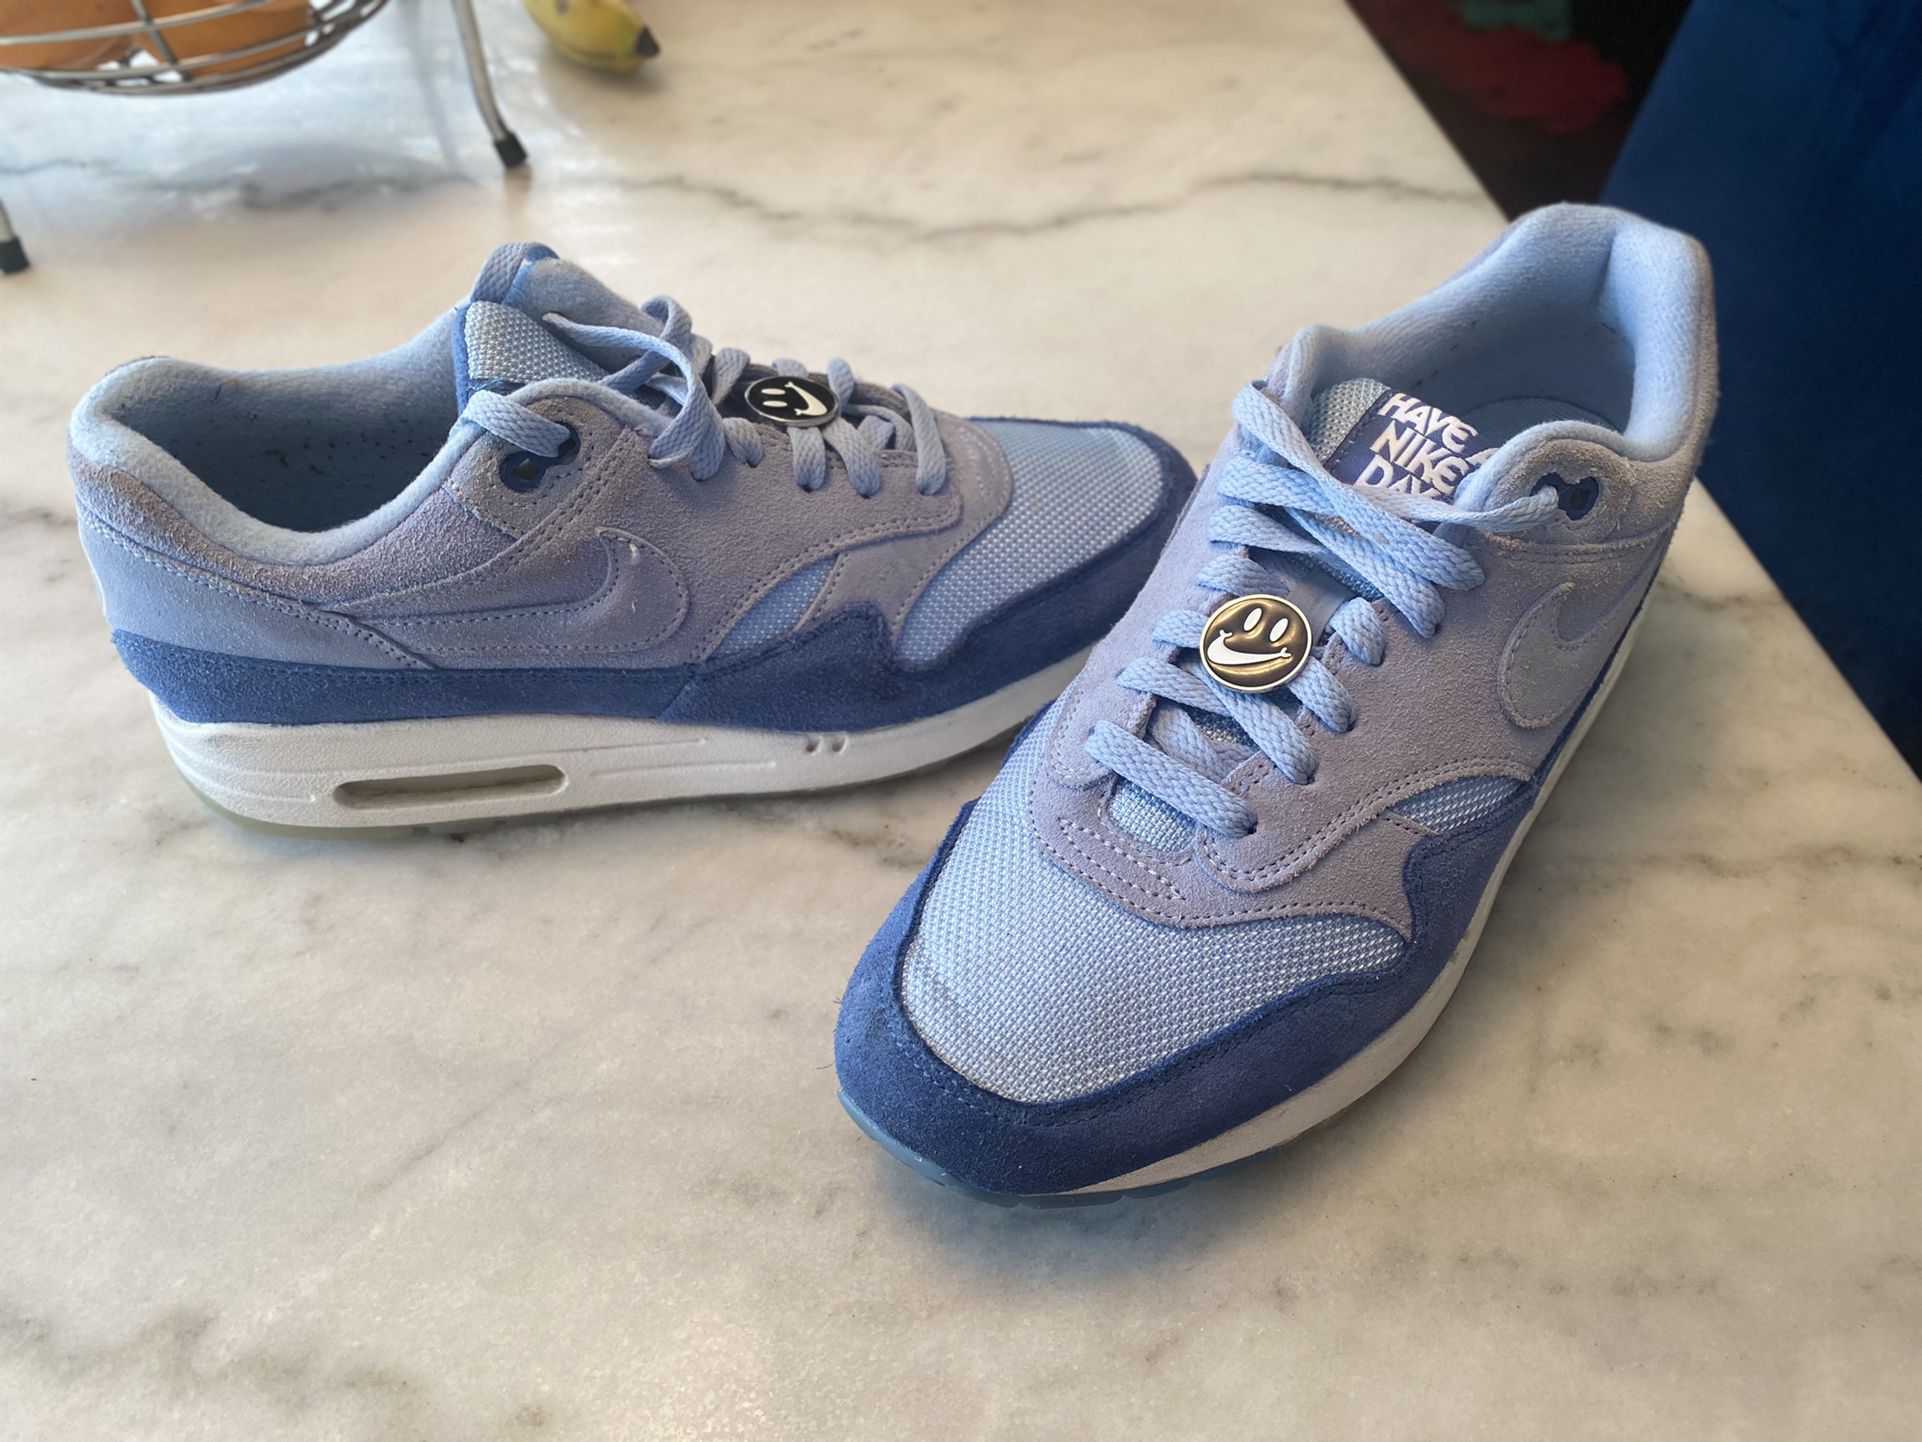 Señuelo Arrestar motivo Nike Air Max 1 Have A Nice Day Indigo Storm 100% Authentic Slightly Used  Men Size 8.5 for Sale in Chesapeake, VA - OfferUp